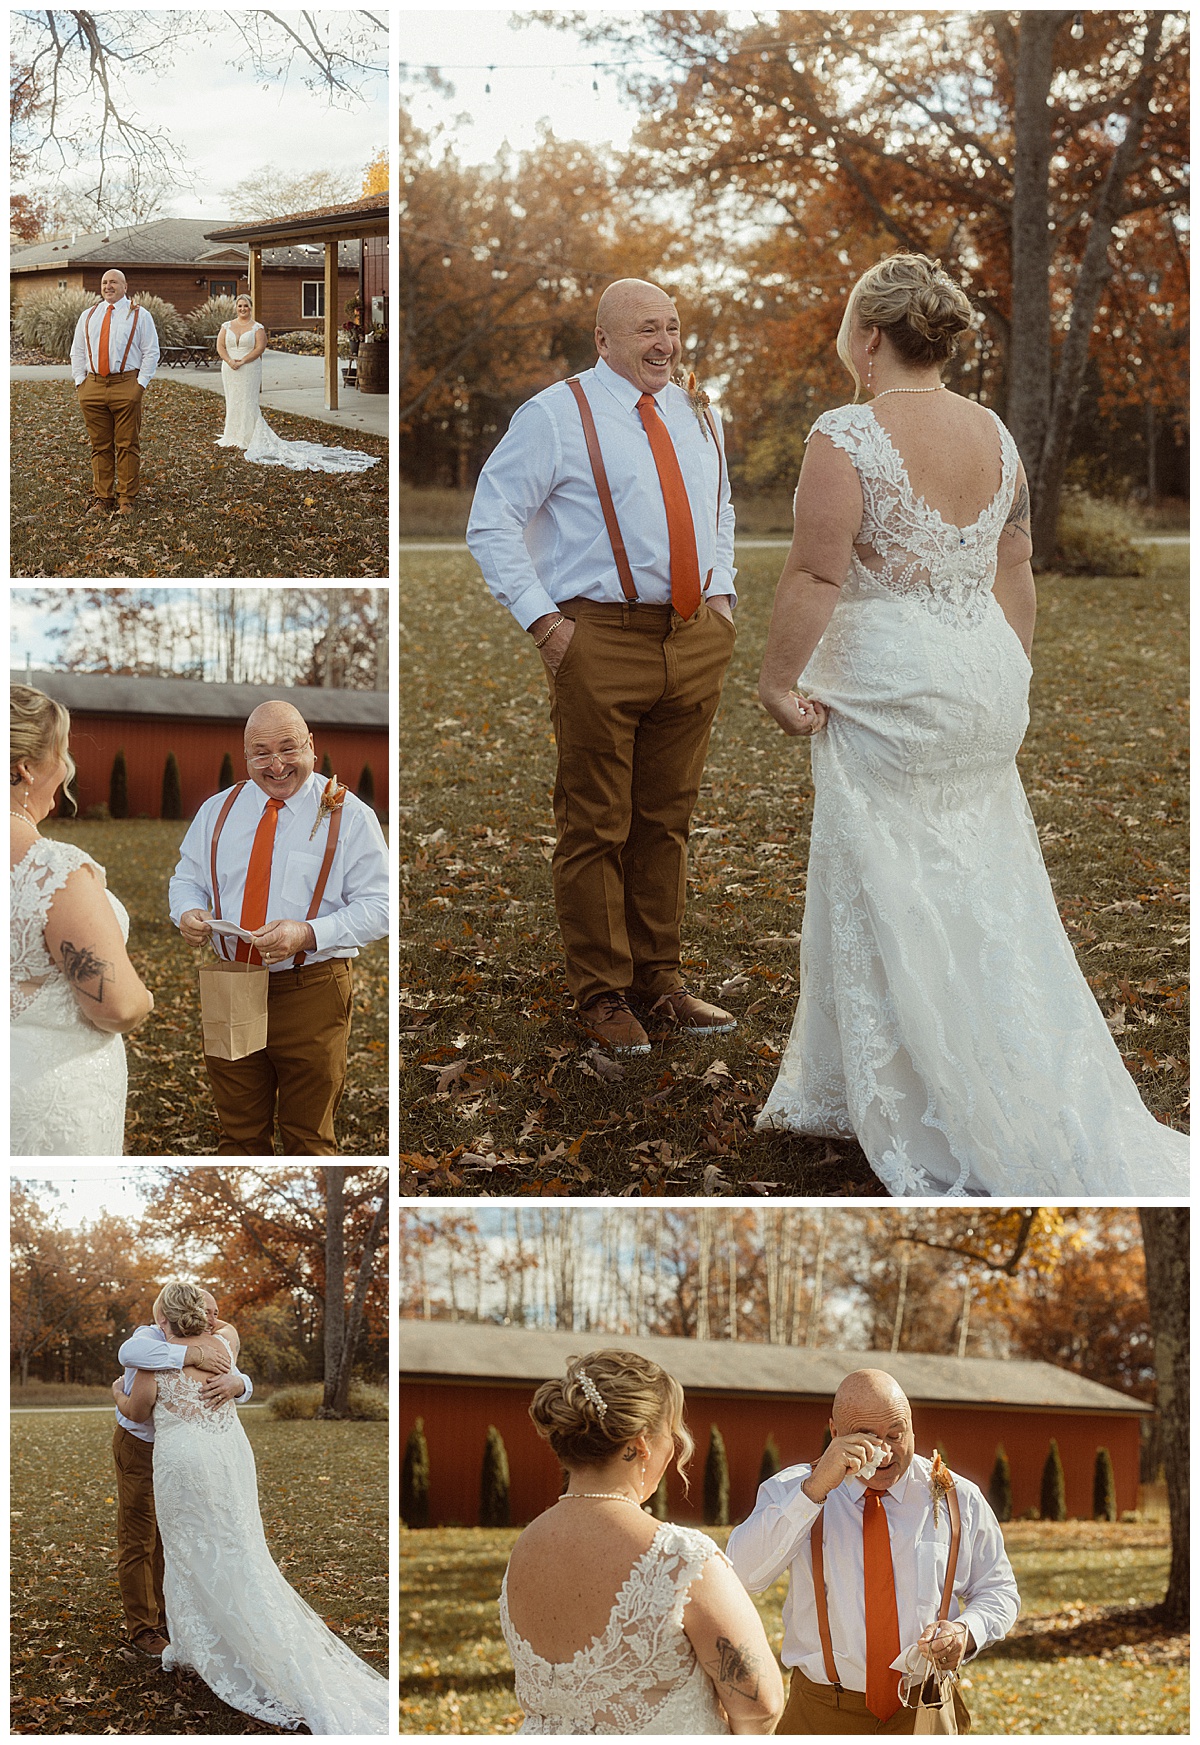 The bride's father cries during their first look before her wedding at The Barn at Higgins Lake.